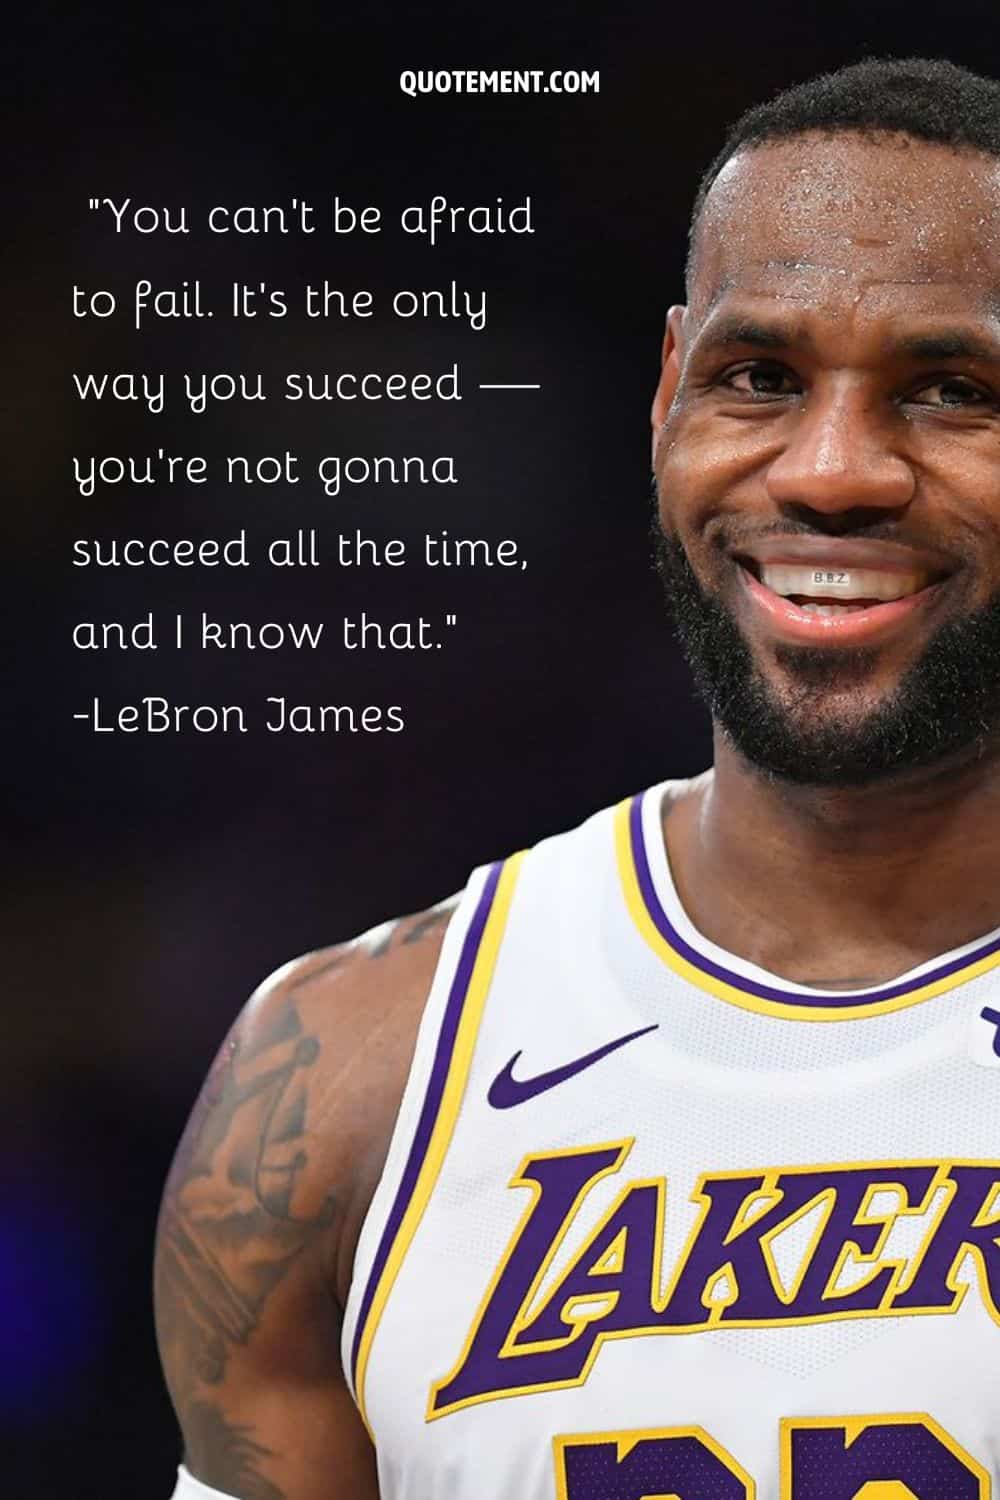 image of LeBron James representing basketball quote